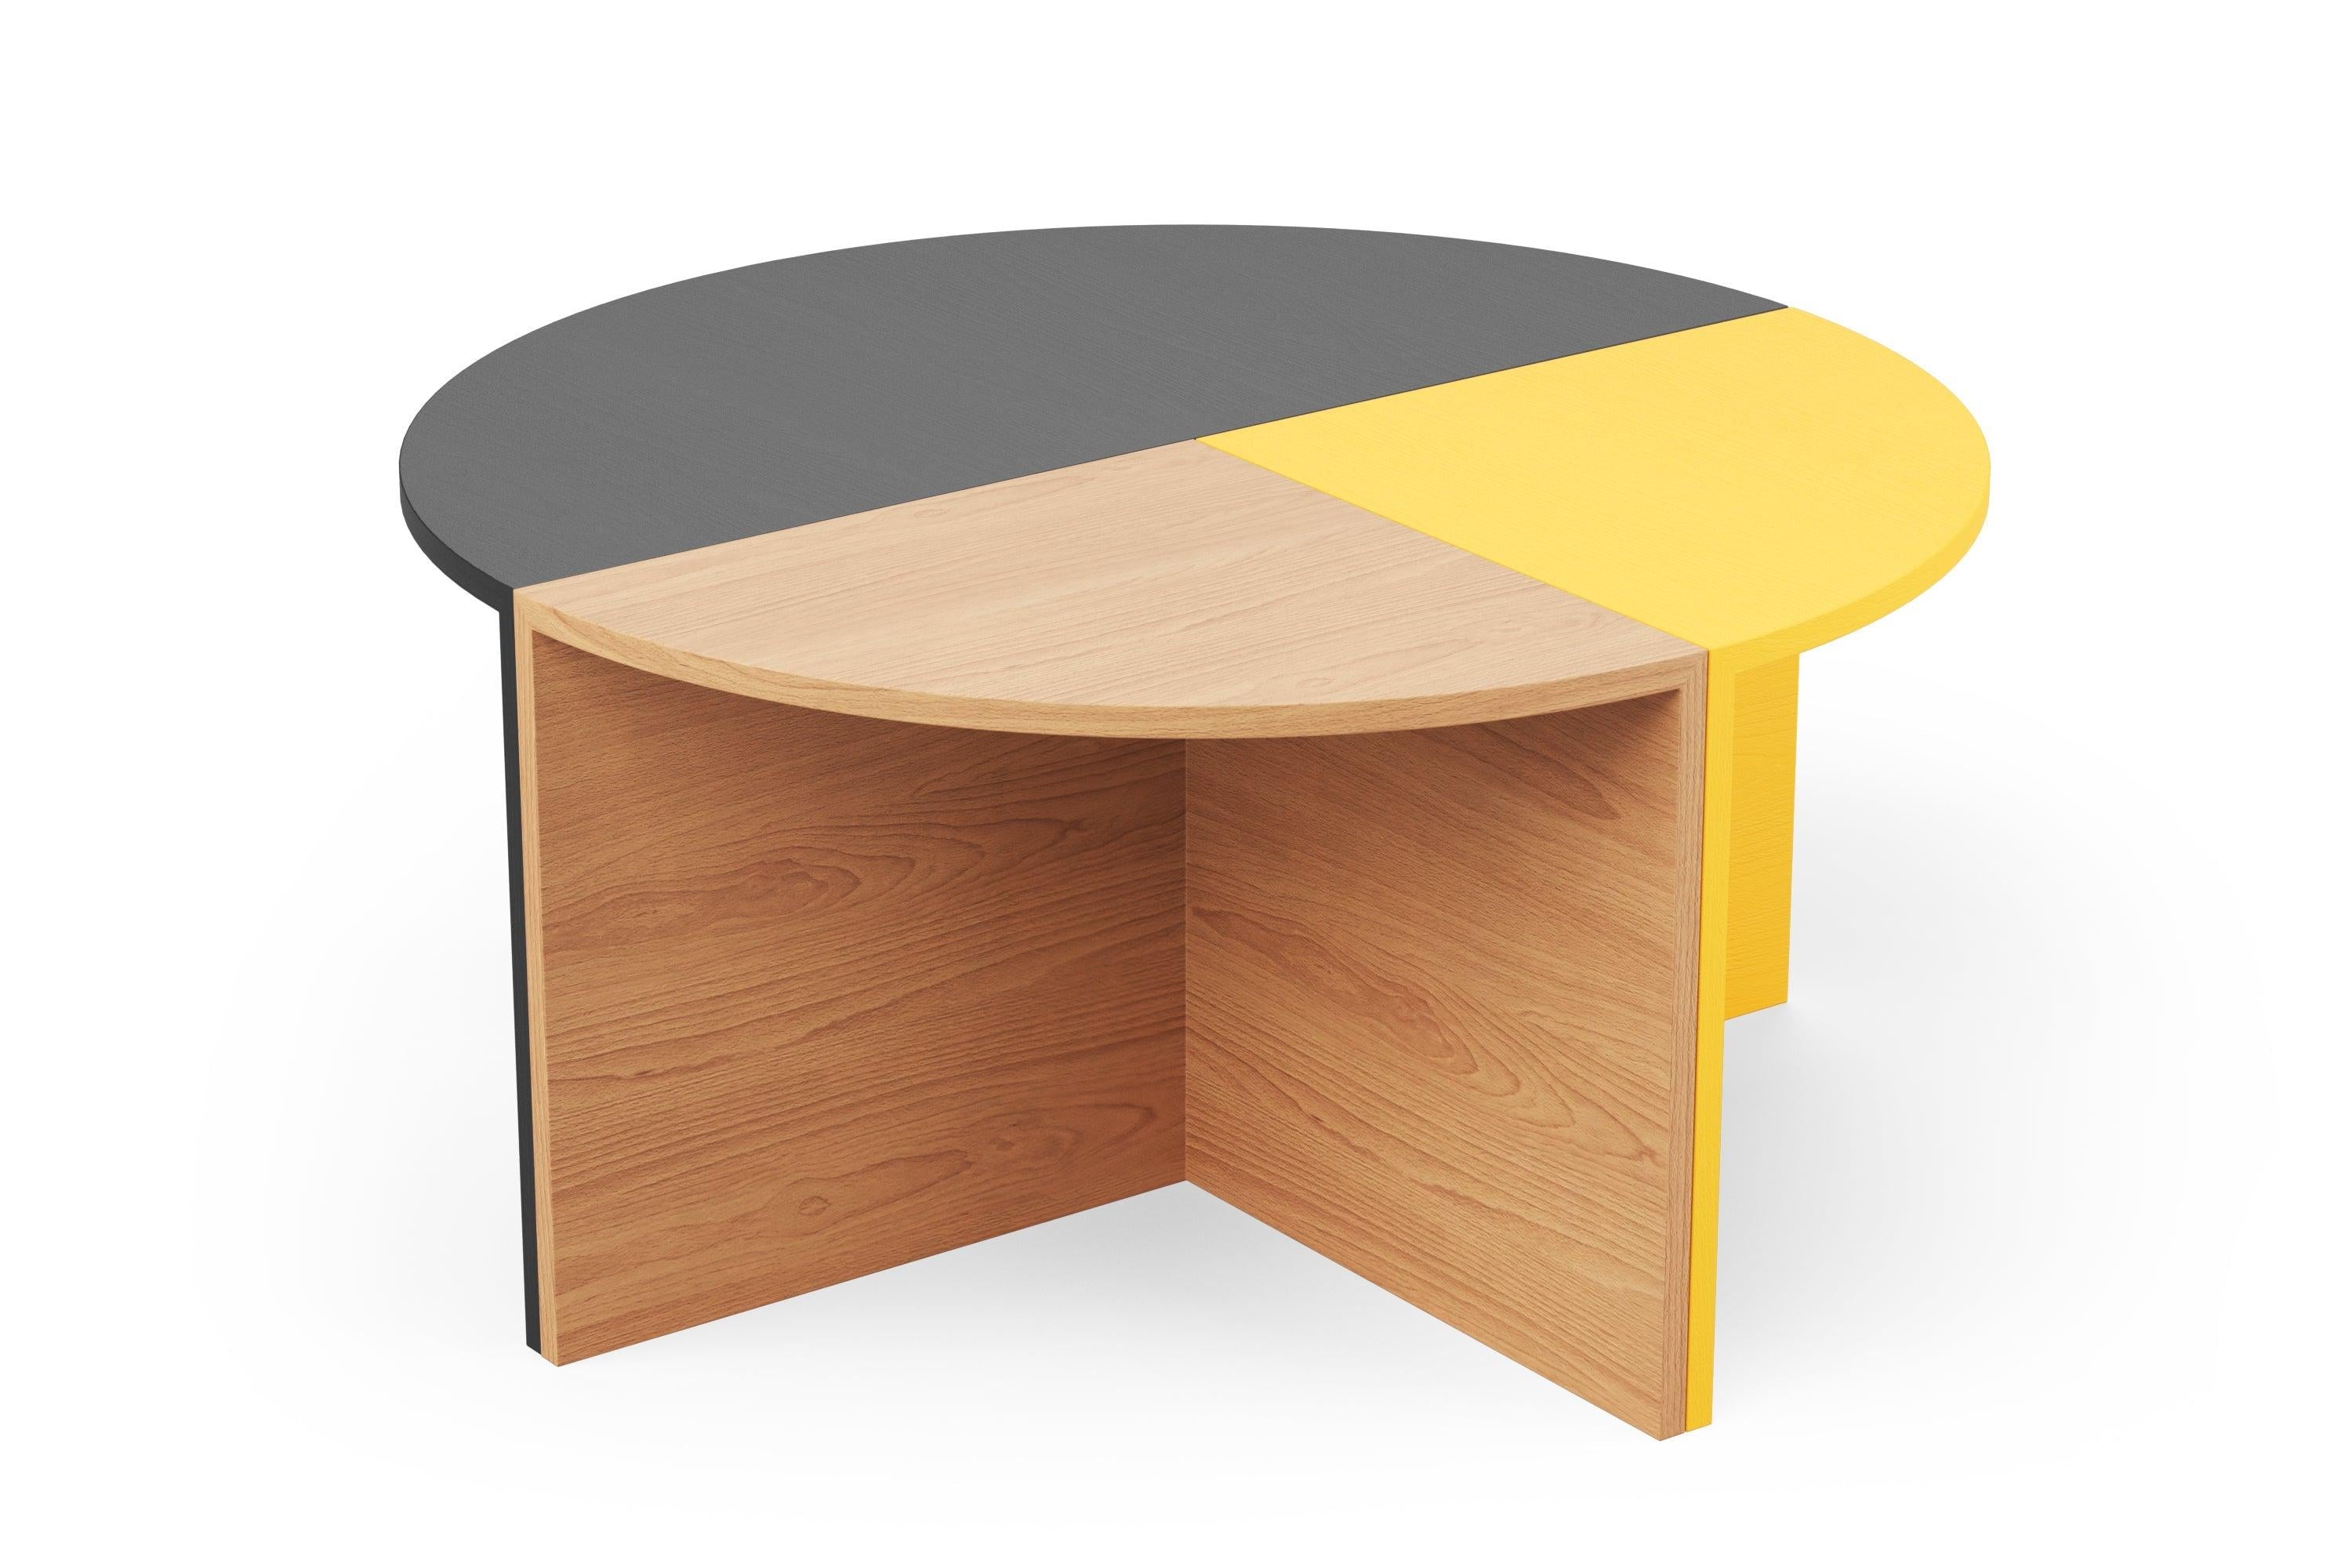 Mexican Hayche Pie Chart System 1/2 Table, Yellow, Solid Wood, UK, Made To Order For Sale